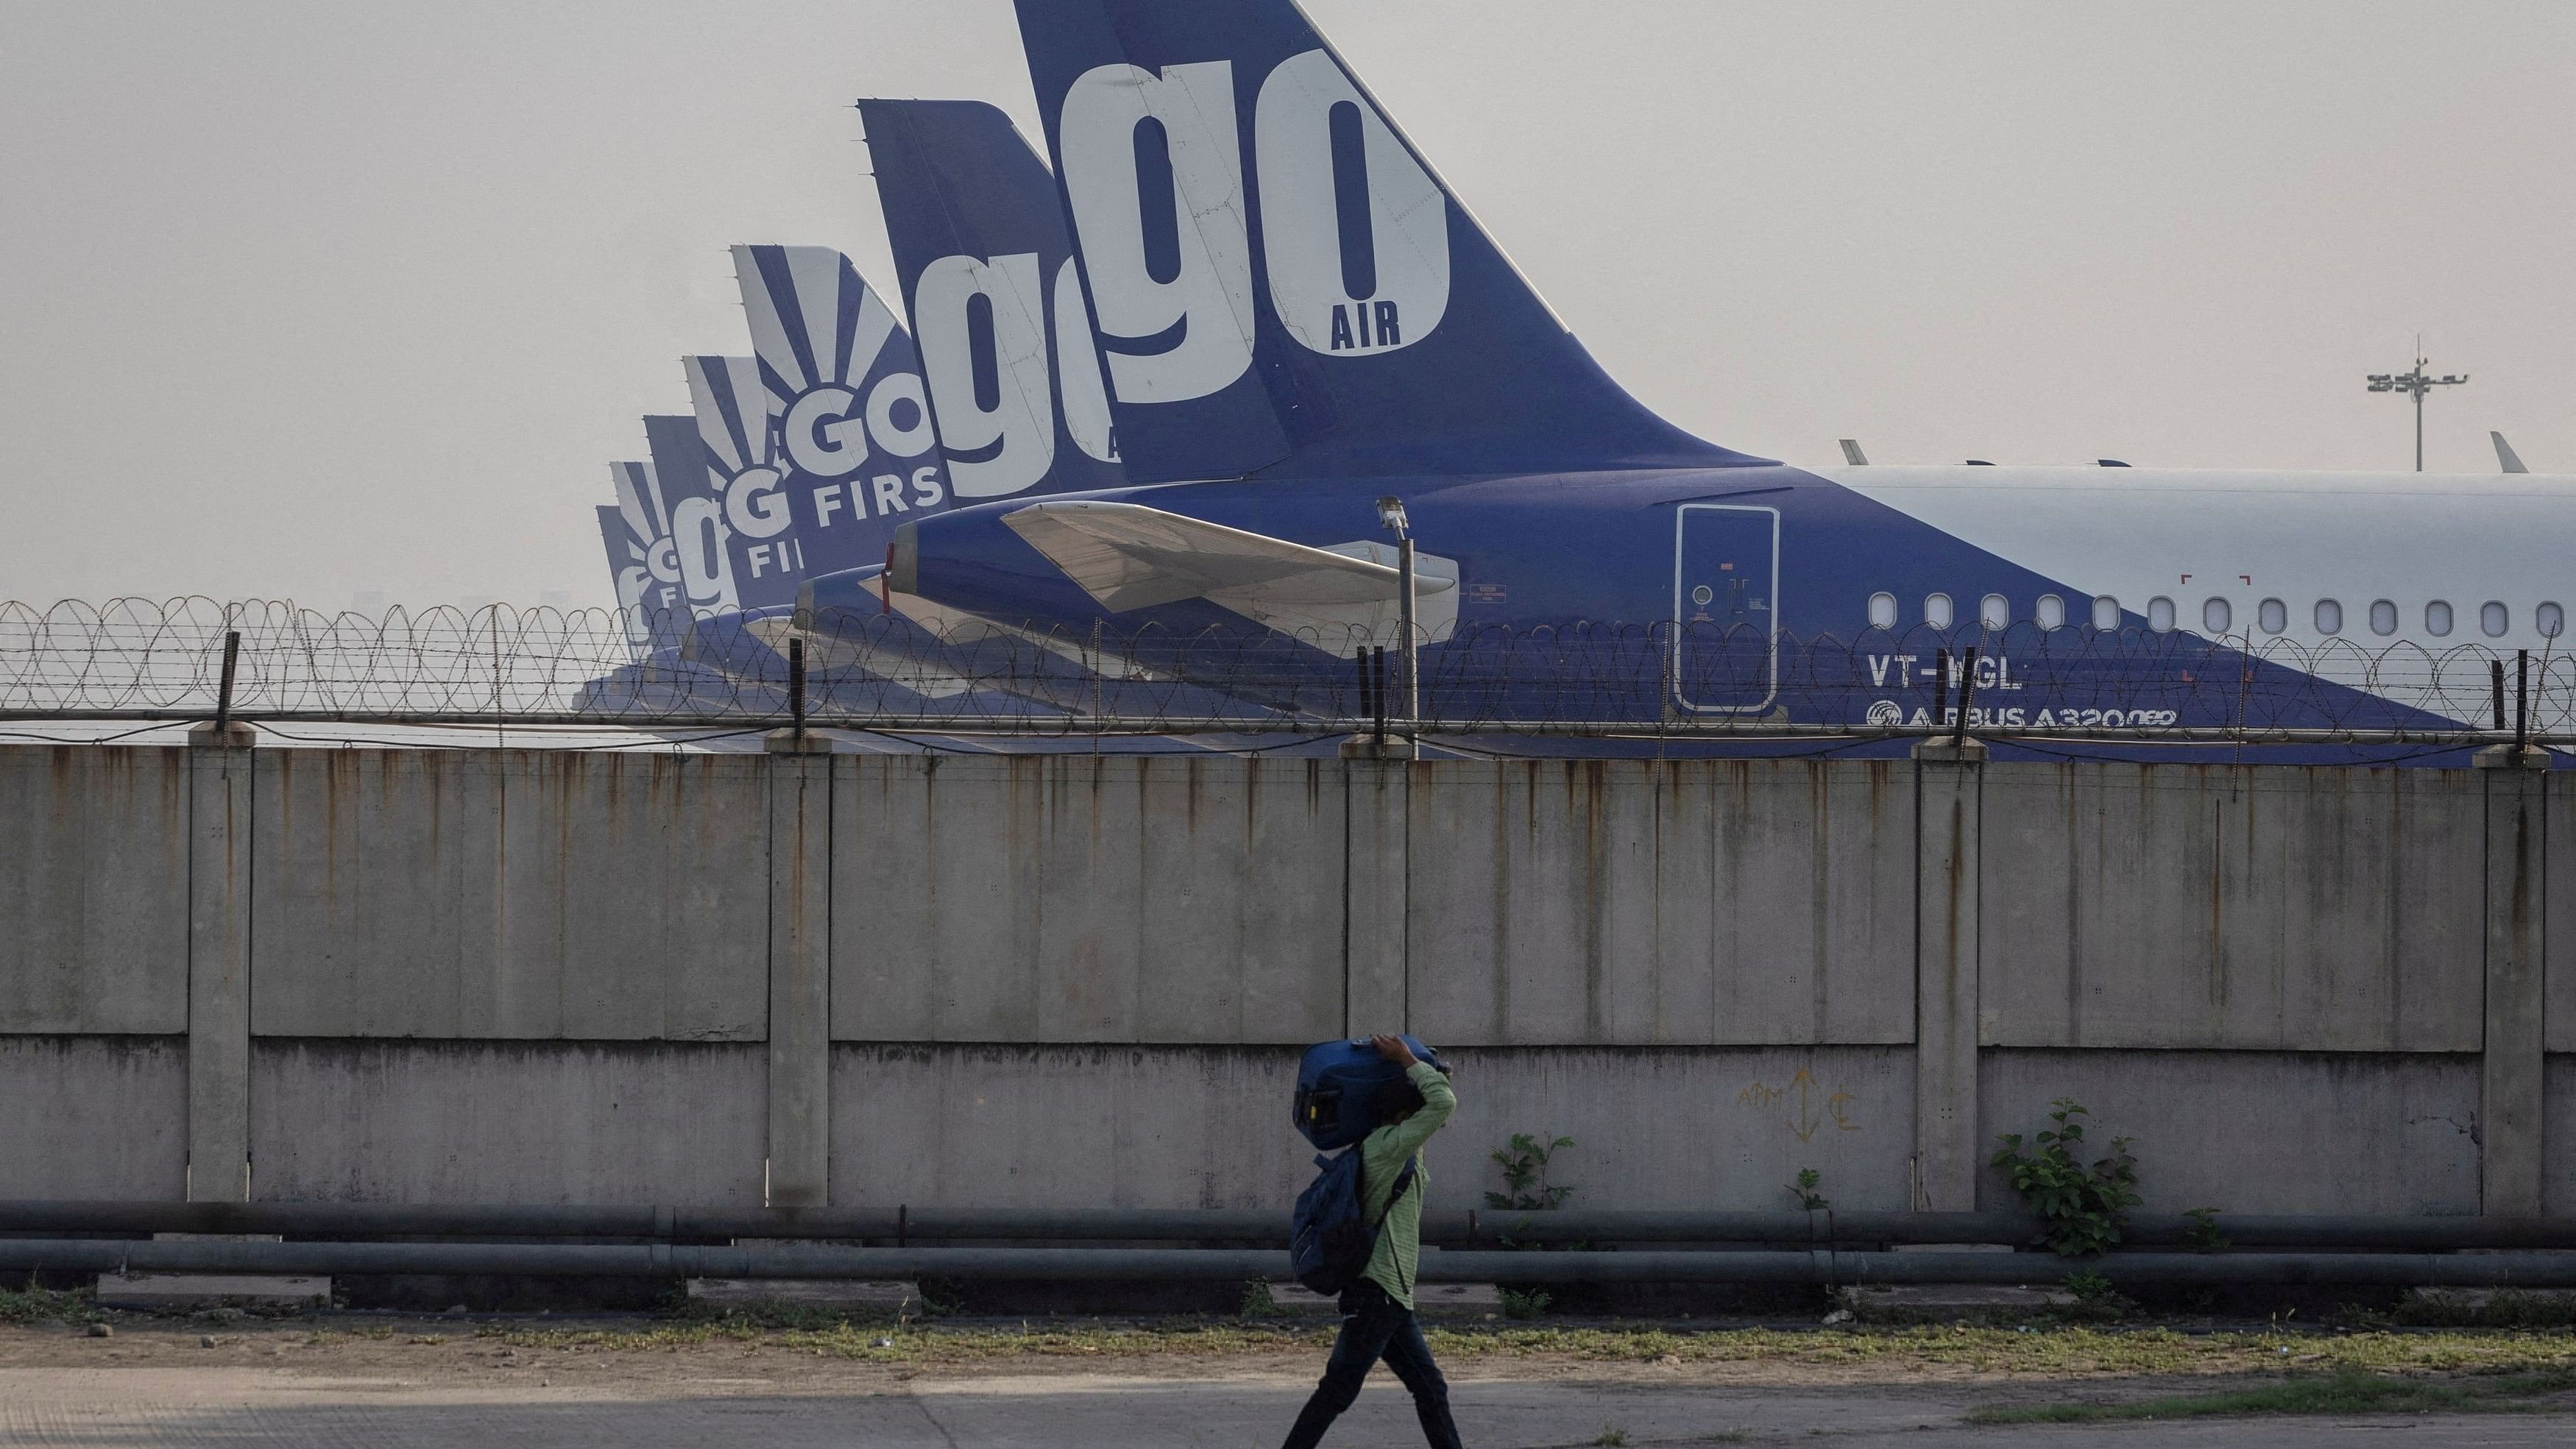 <div class="paragraphs"><p> GoAir passenger aircrafts parked on the tarmac at the airport in New Delhi, India </p></div>